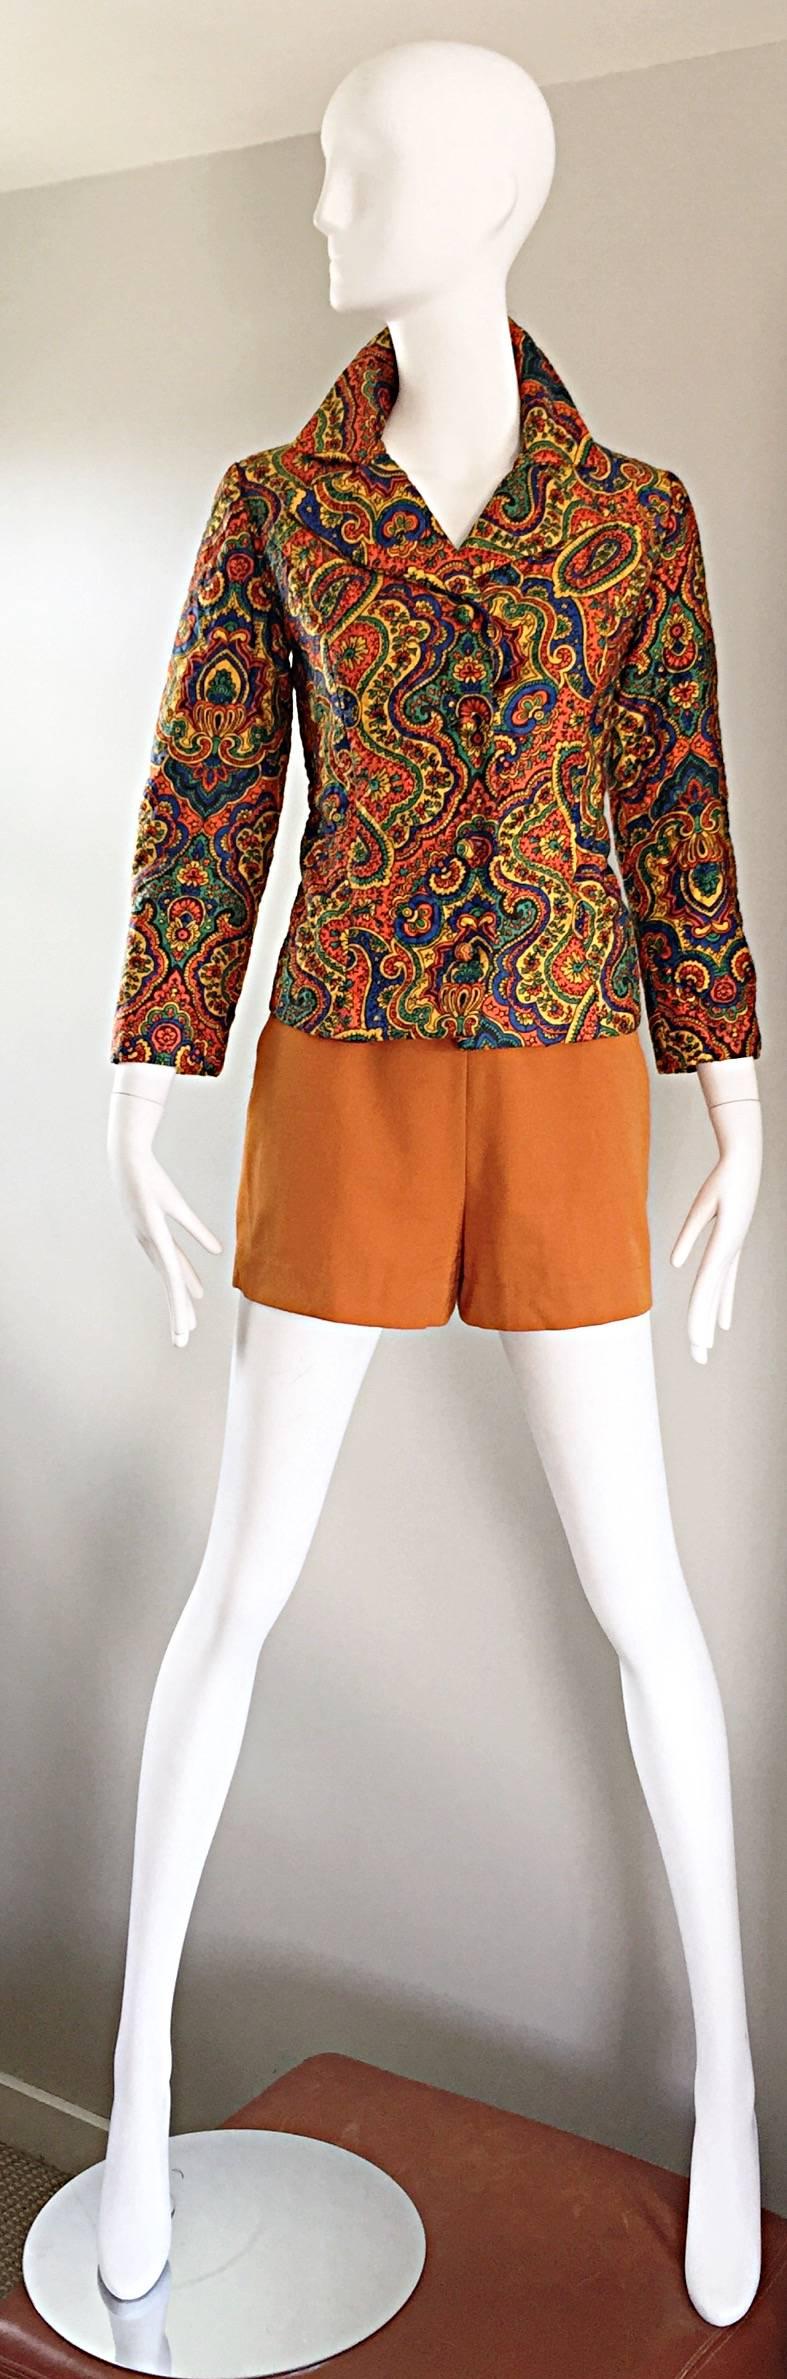 Rare and totally awesome 60s vintage WIPPETTE cotton blazer jacket! Features an allover paisley print in green, orange, yellow, and blue. The perfect statement piece! Soft heavy duty cotton keeps shape nicely. Fabric covered ball buttons up the